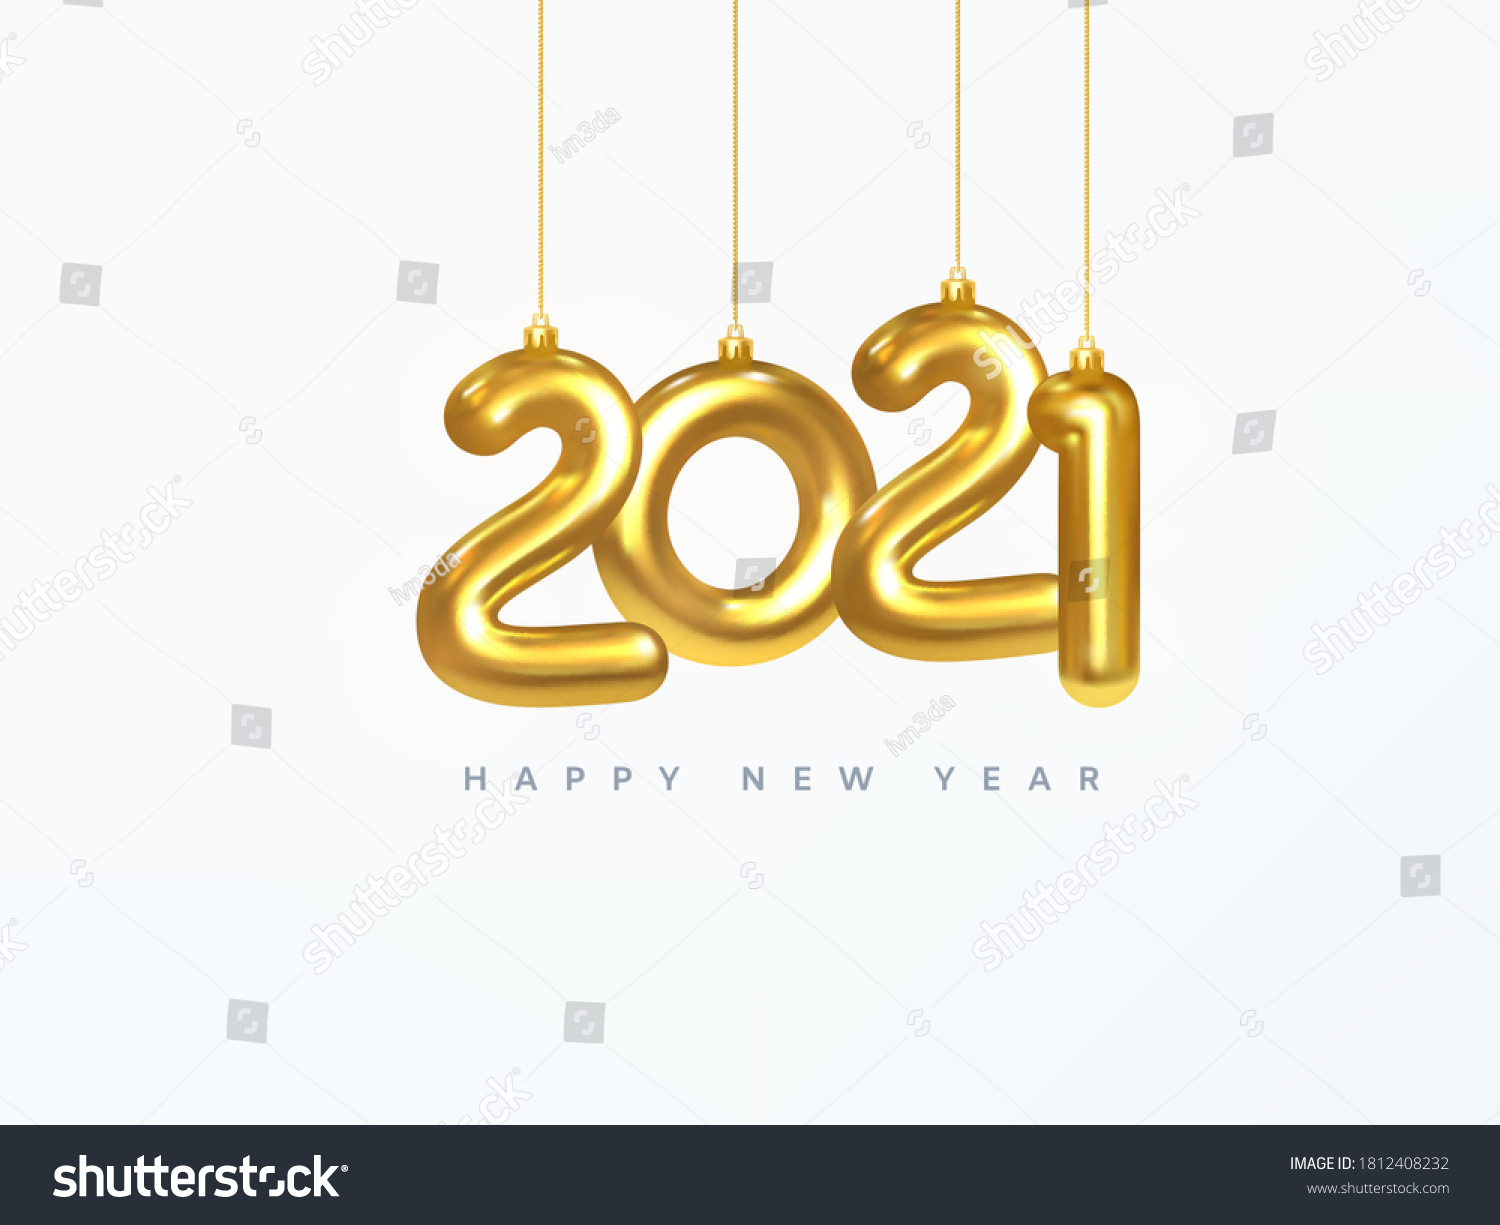 2021 New Year card. Design of Christmas decorations hanging on a gold chain gold number 2021. Happy new year. Realistic 3d. Vector illustration #1812408232